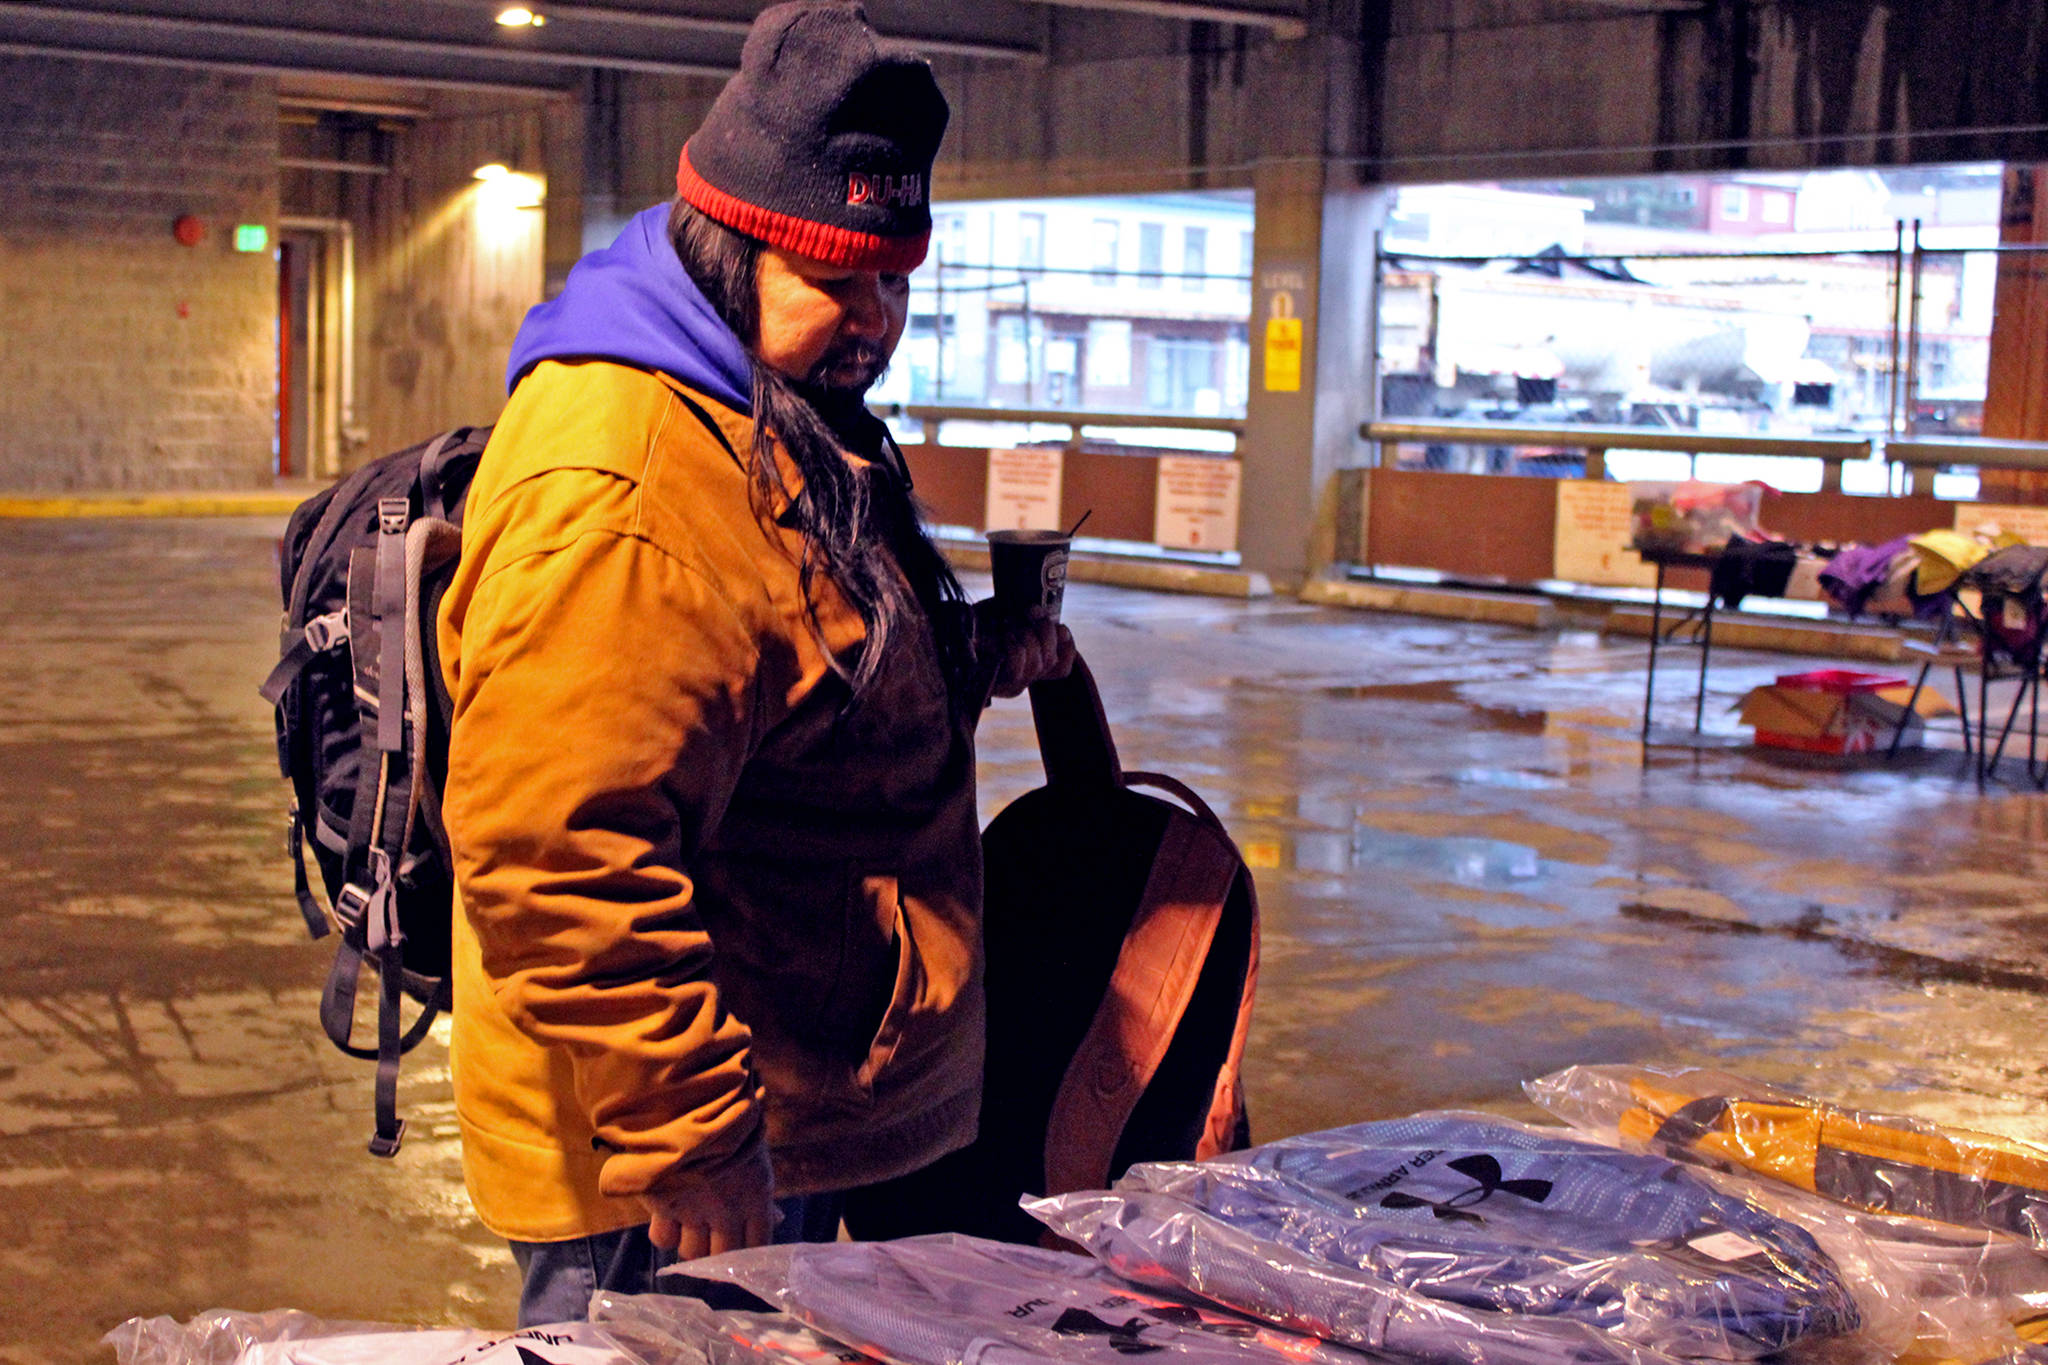 Charles Fawcett Jr. looks at backpacks provided by Central Council of Tlingit and Haida Indian Tribes of Alaska in the Marine Parking Garage on Saturday, Nov. 28. The parking garage was the site of Juneau Street Warming event meant to provide on-the-spot assistance to people experiencing homelessness. (Ben Hohenstatt / Juneau Empire)